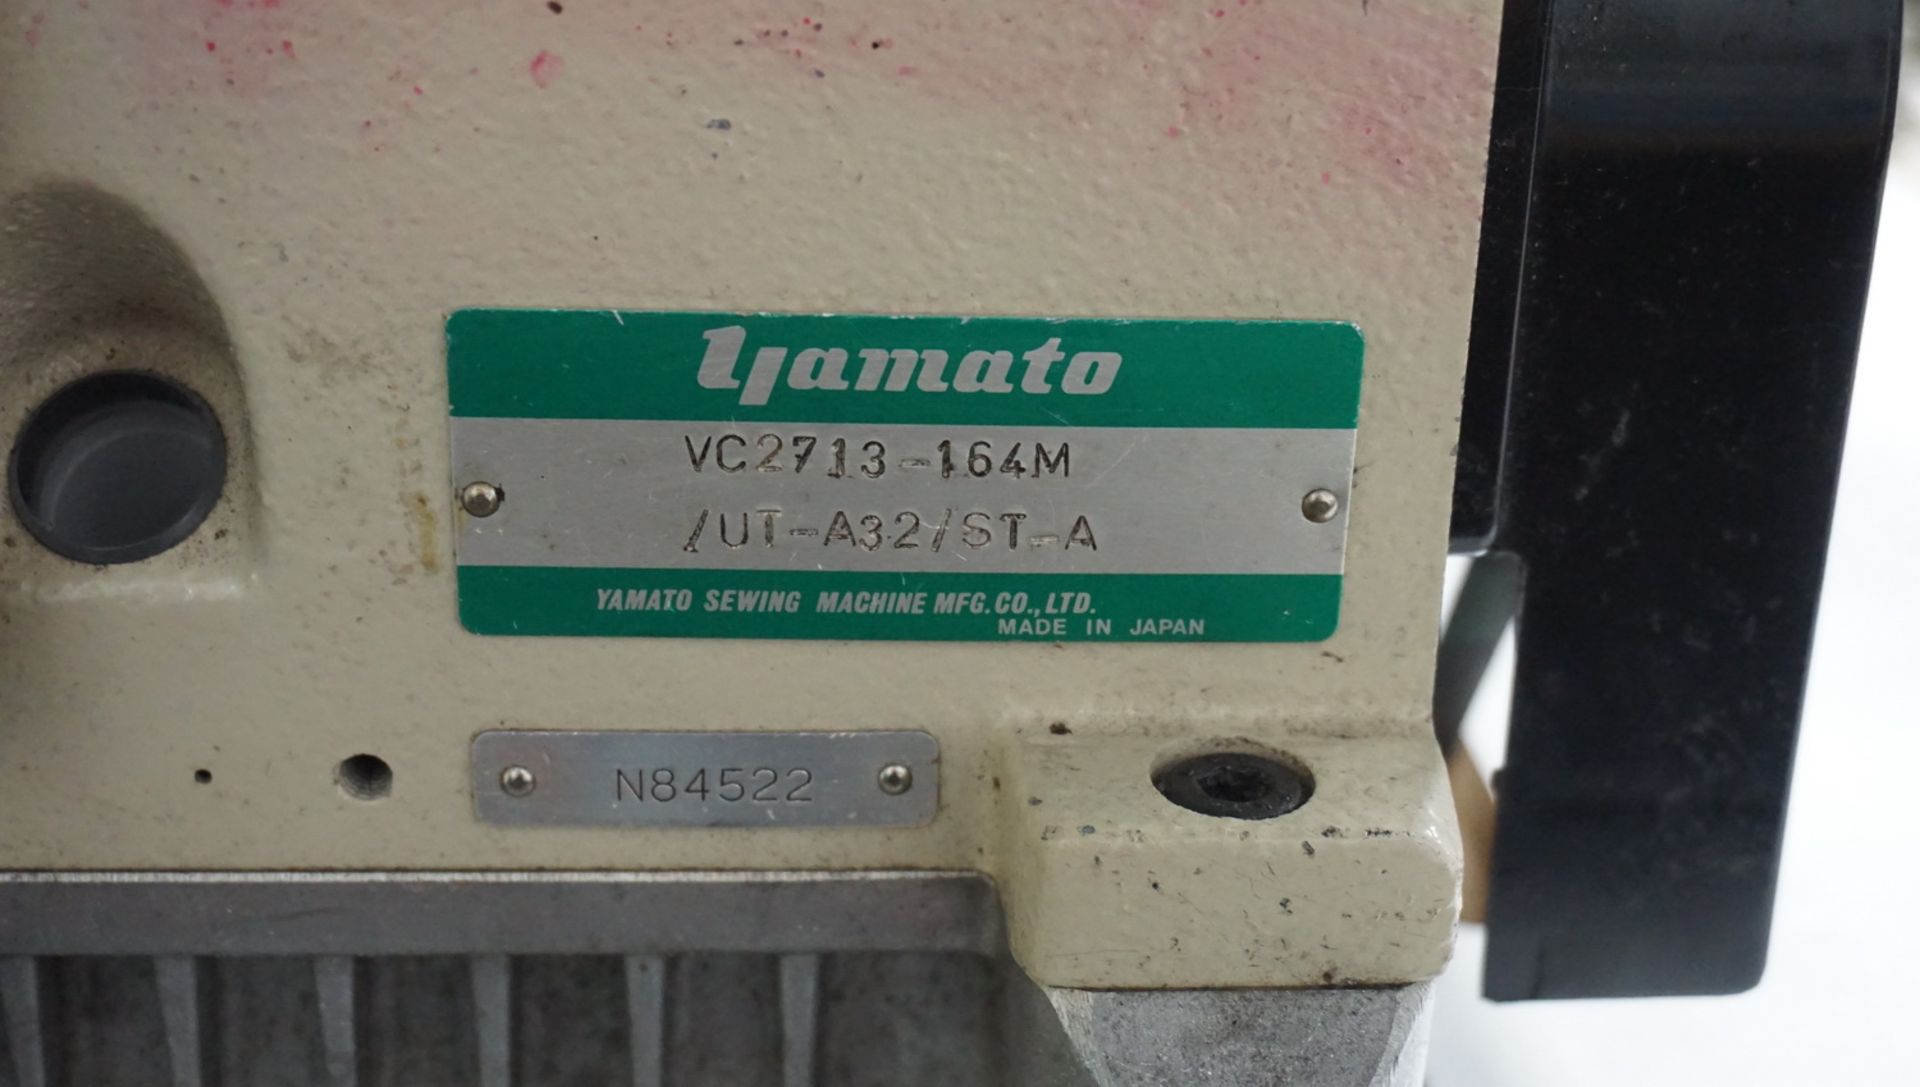 YAMATO VC2713-164M/UT-A32/ST-A 3-NEEDLE CYLINDER COVERSTITCH MACHINE, S/N N84522 (LOCATED @ 101 - Image 6 of 6